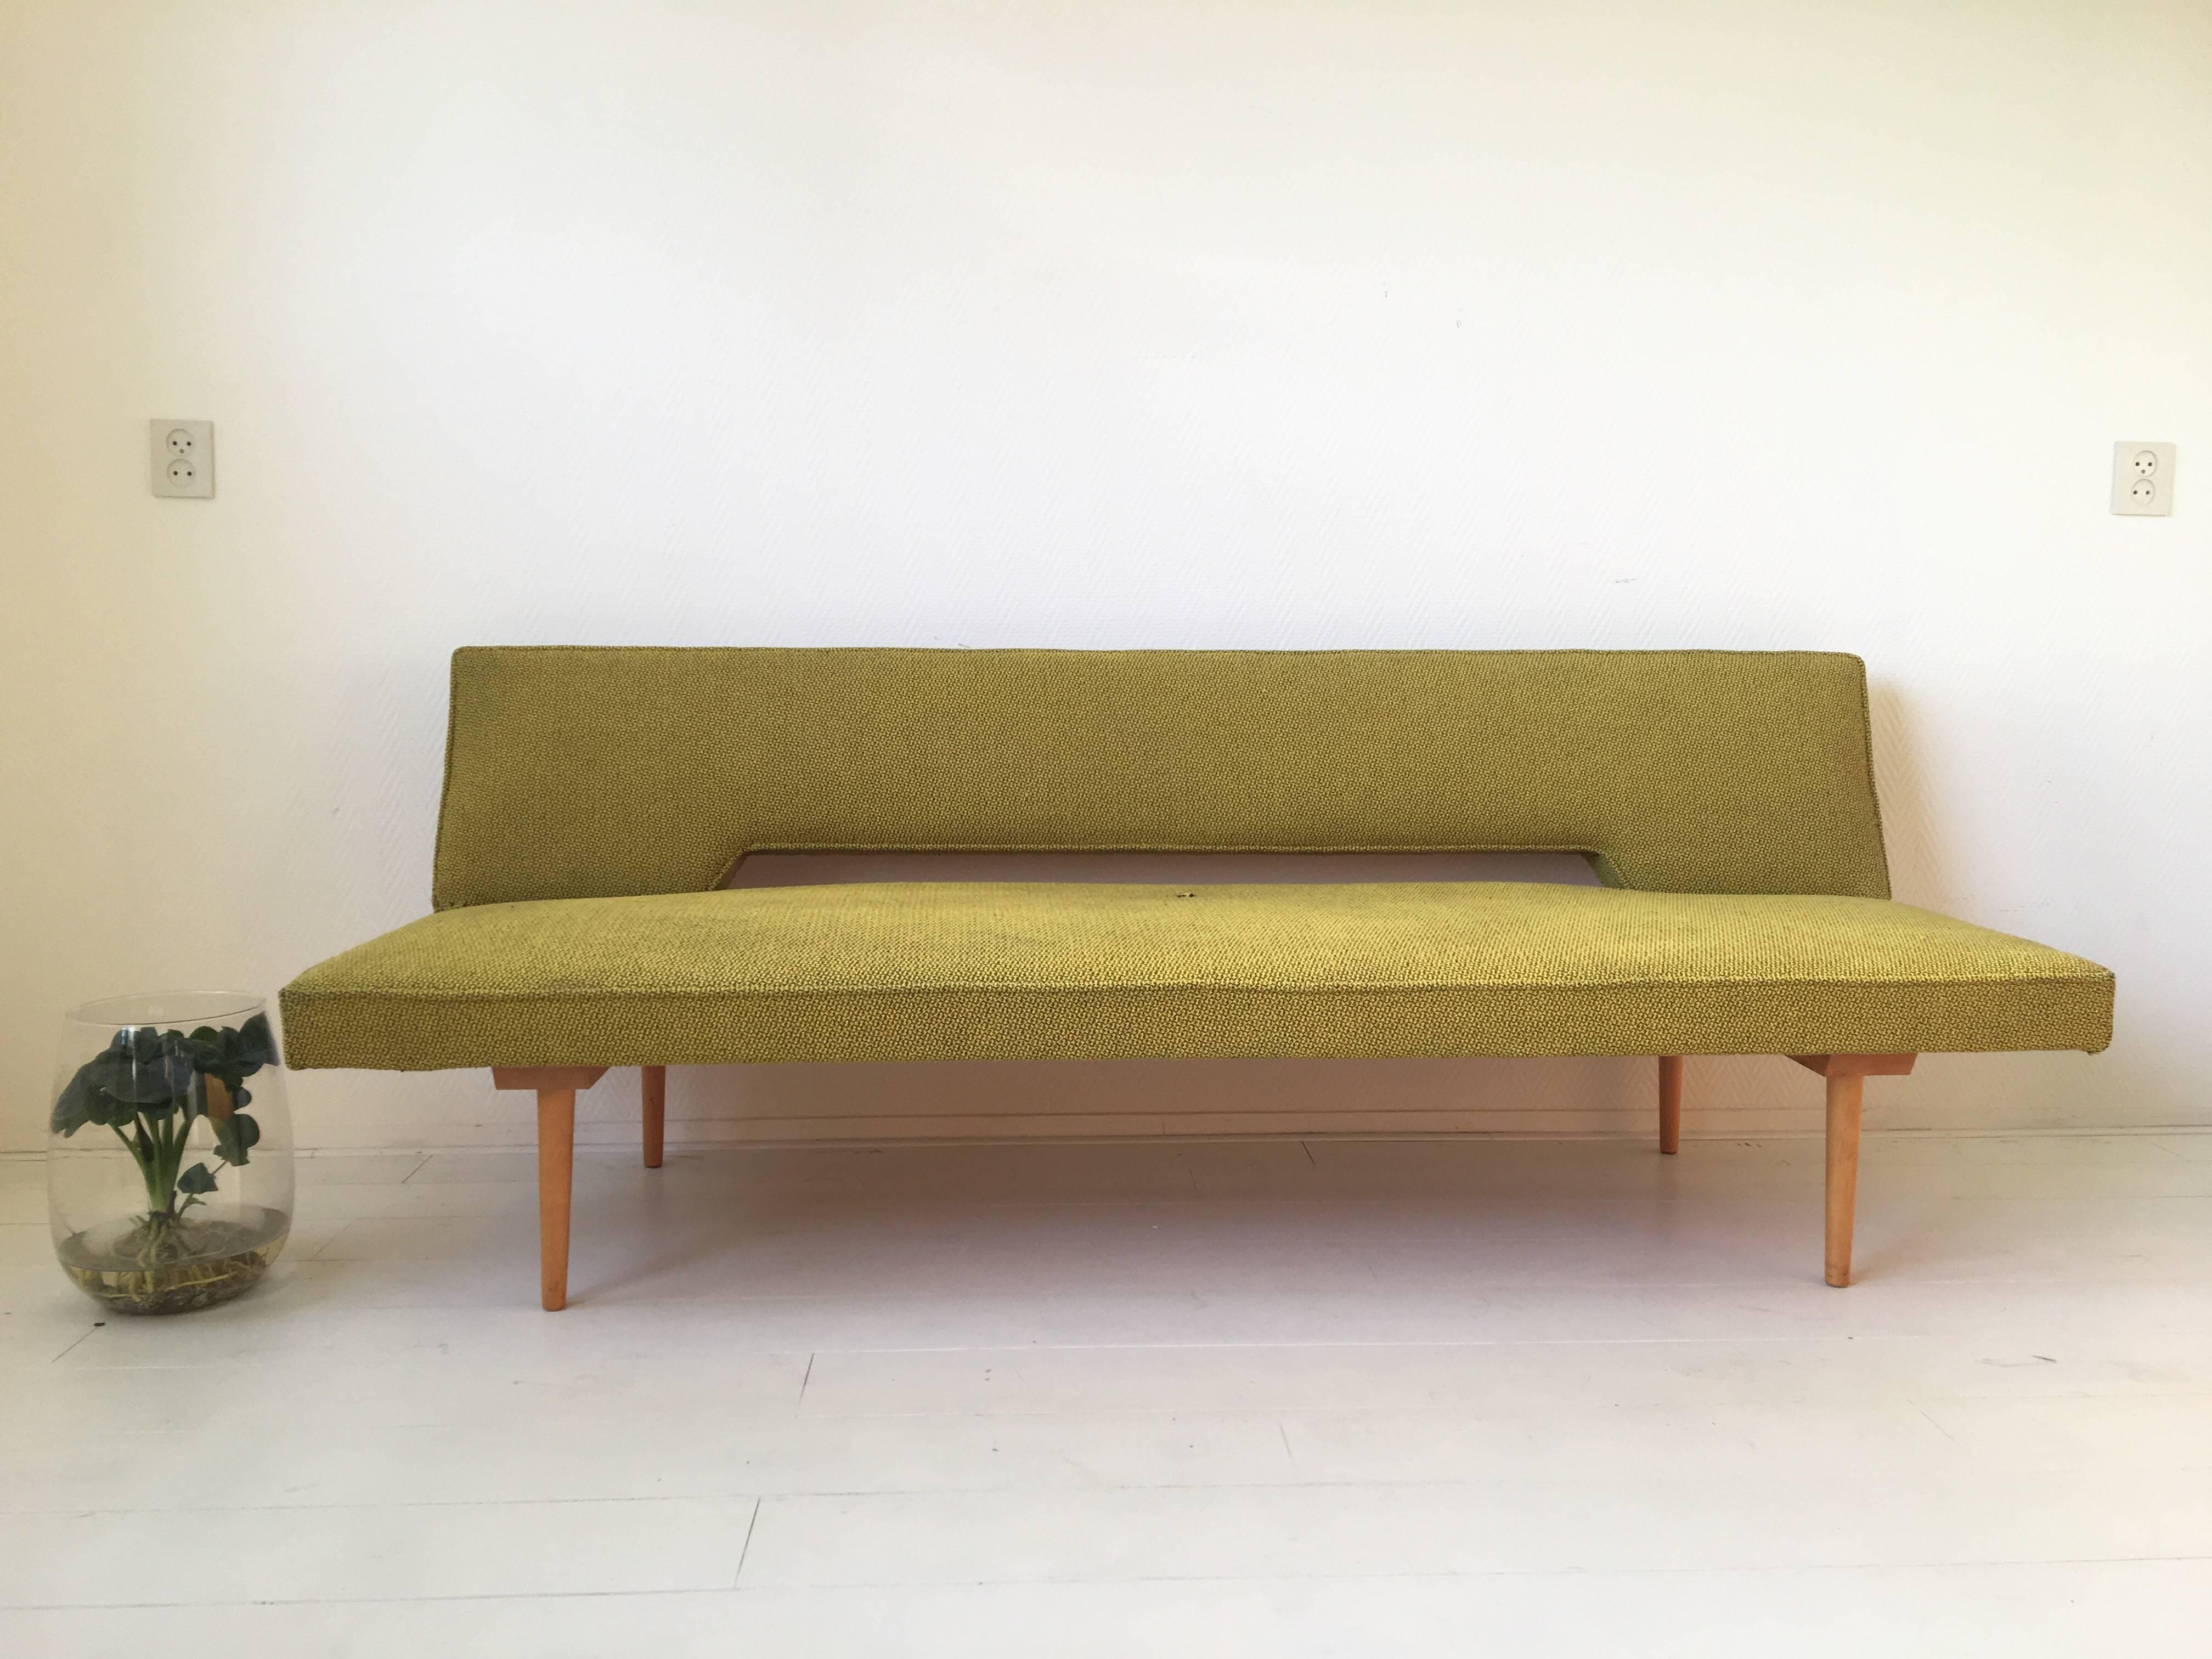 Wonderful Mid-Century Modern sofa, designed by Miroslav Navratil, circa 1960s. This simple sofa can easily be changed into a bed. The sofa features a beech frame with still the original yellow and black fabric. Timeless design with some wear to the